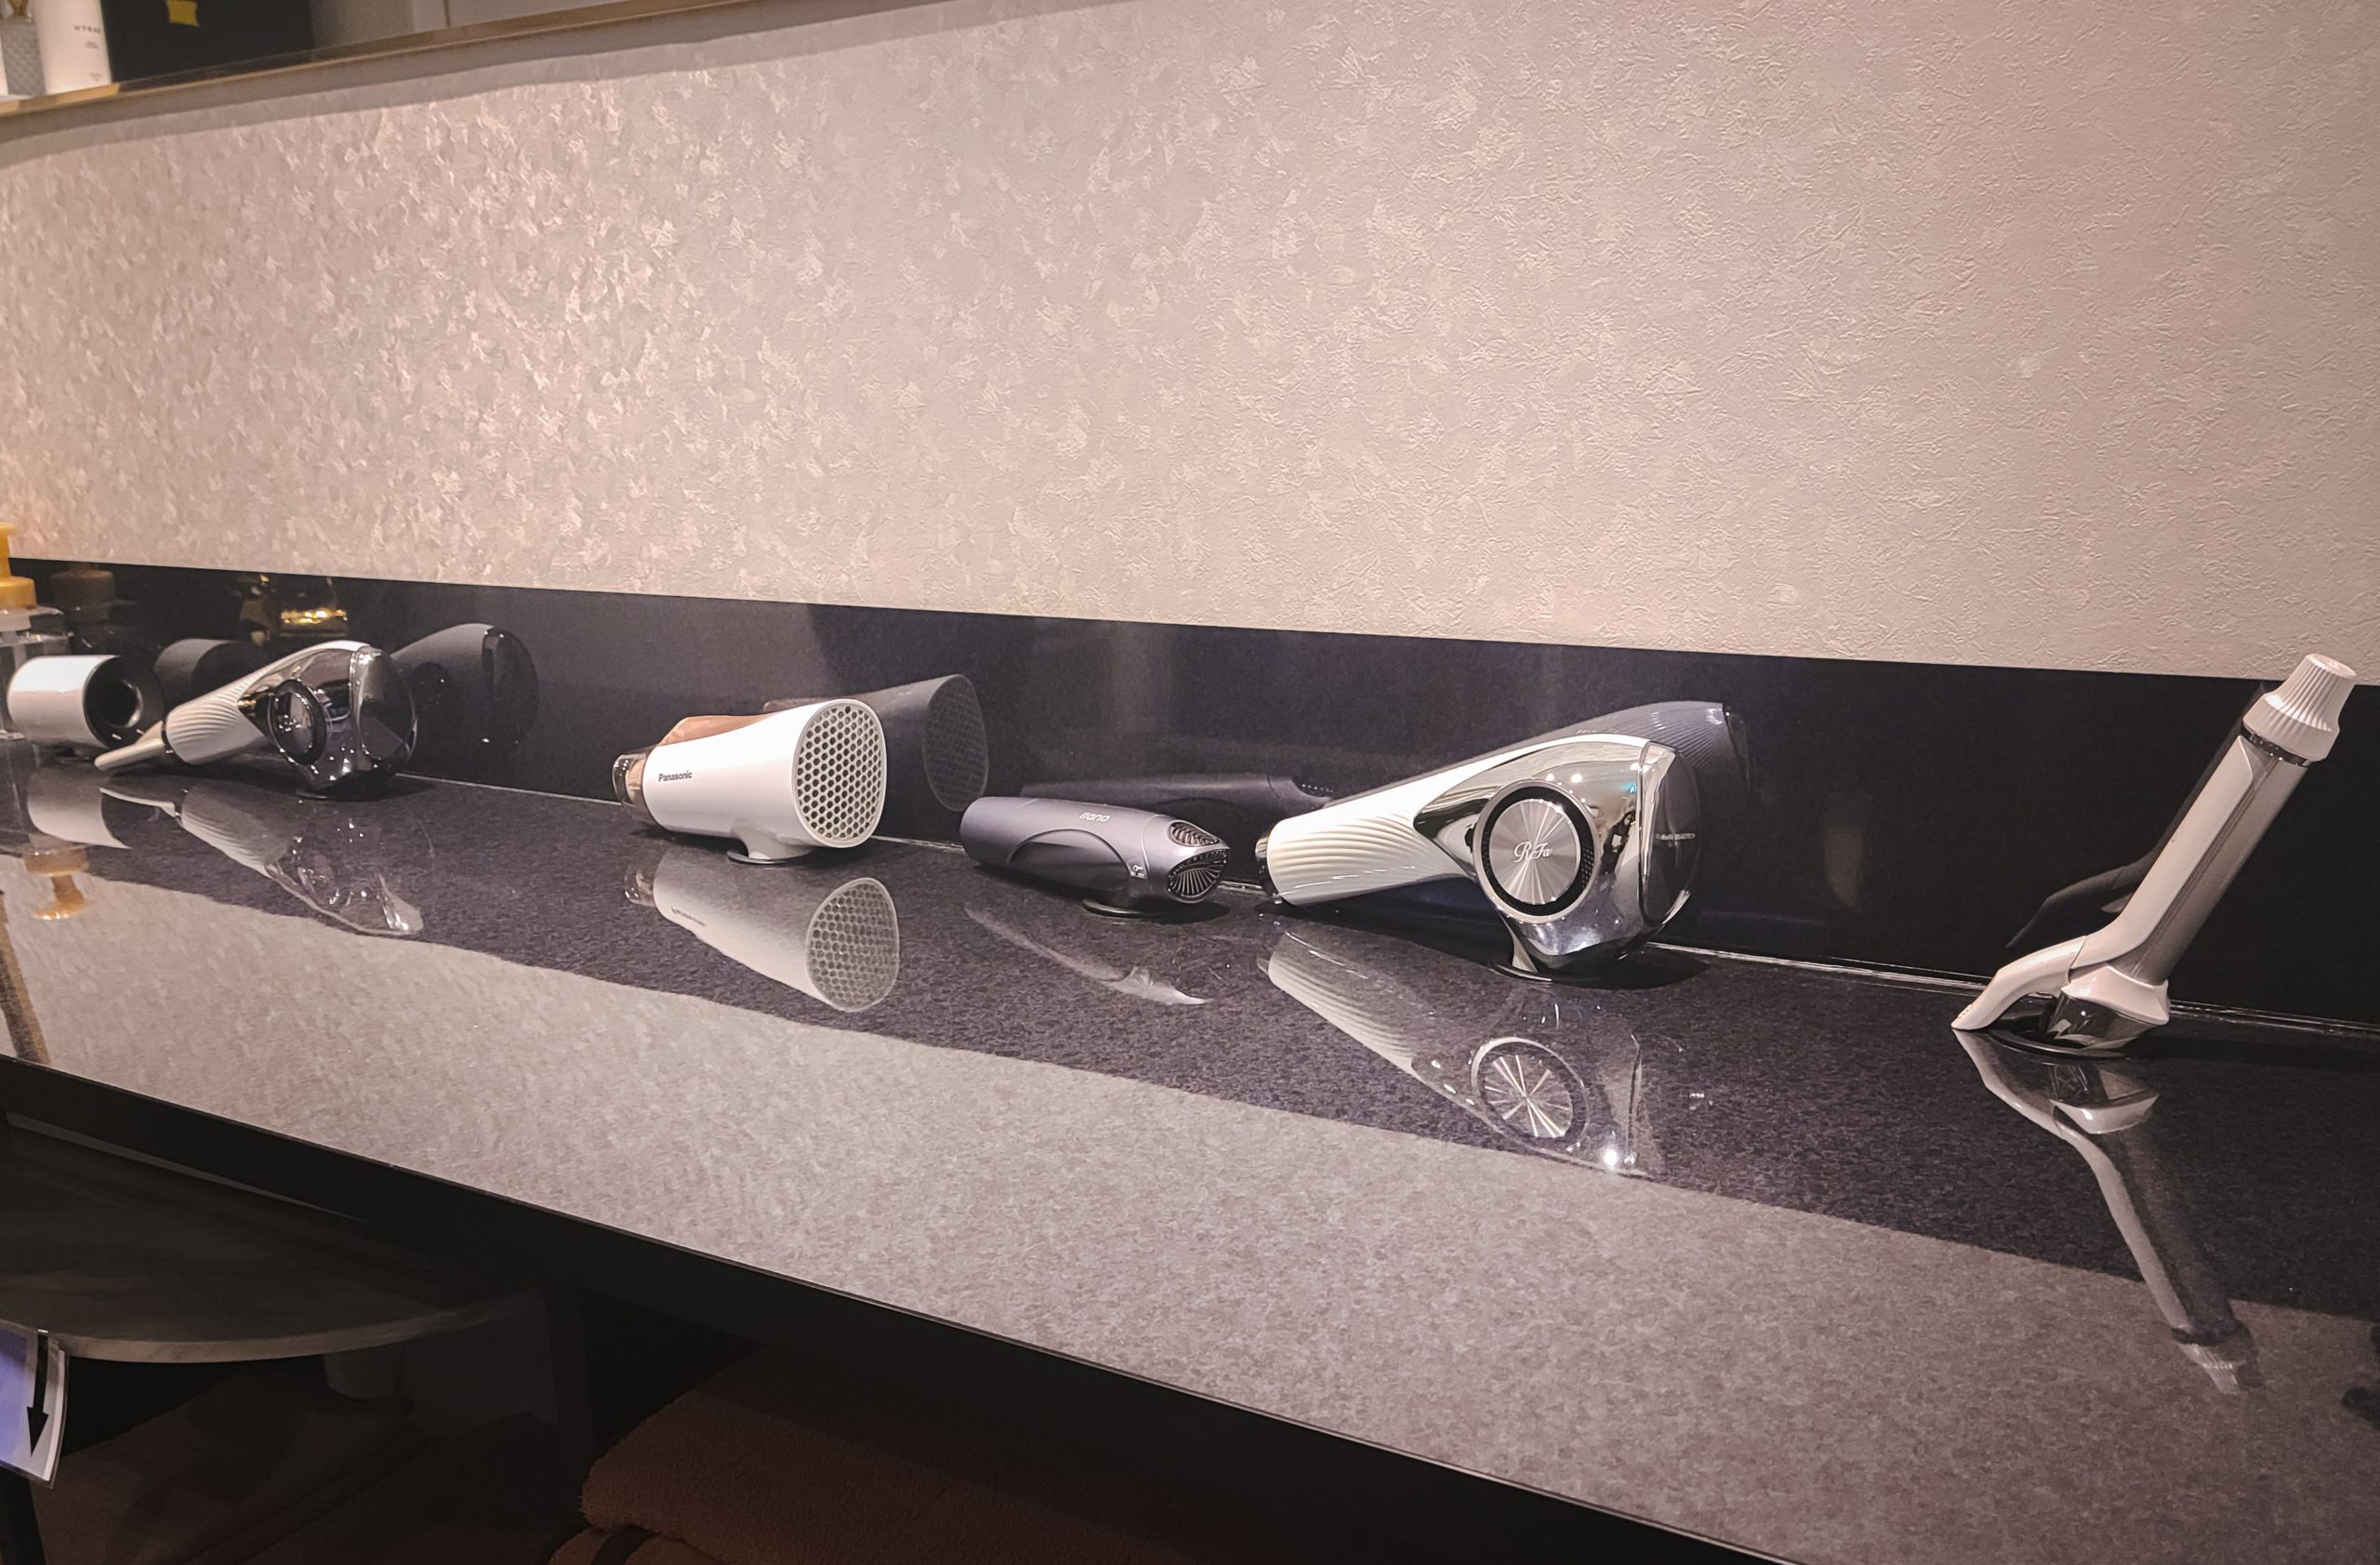 High-end ReFa and Dyson hair dryers, and a curling iron are available for use